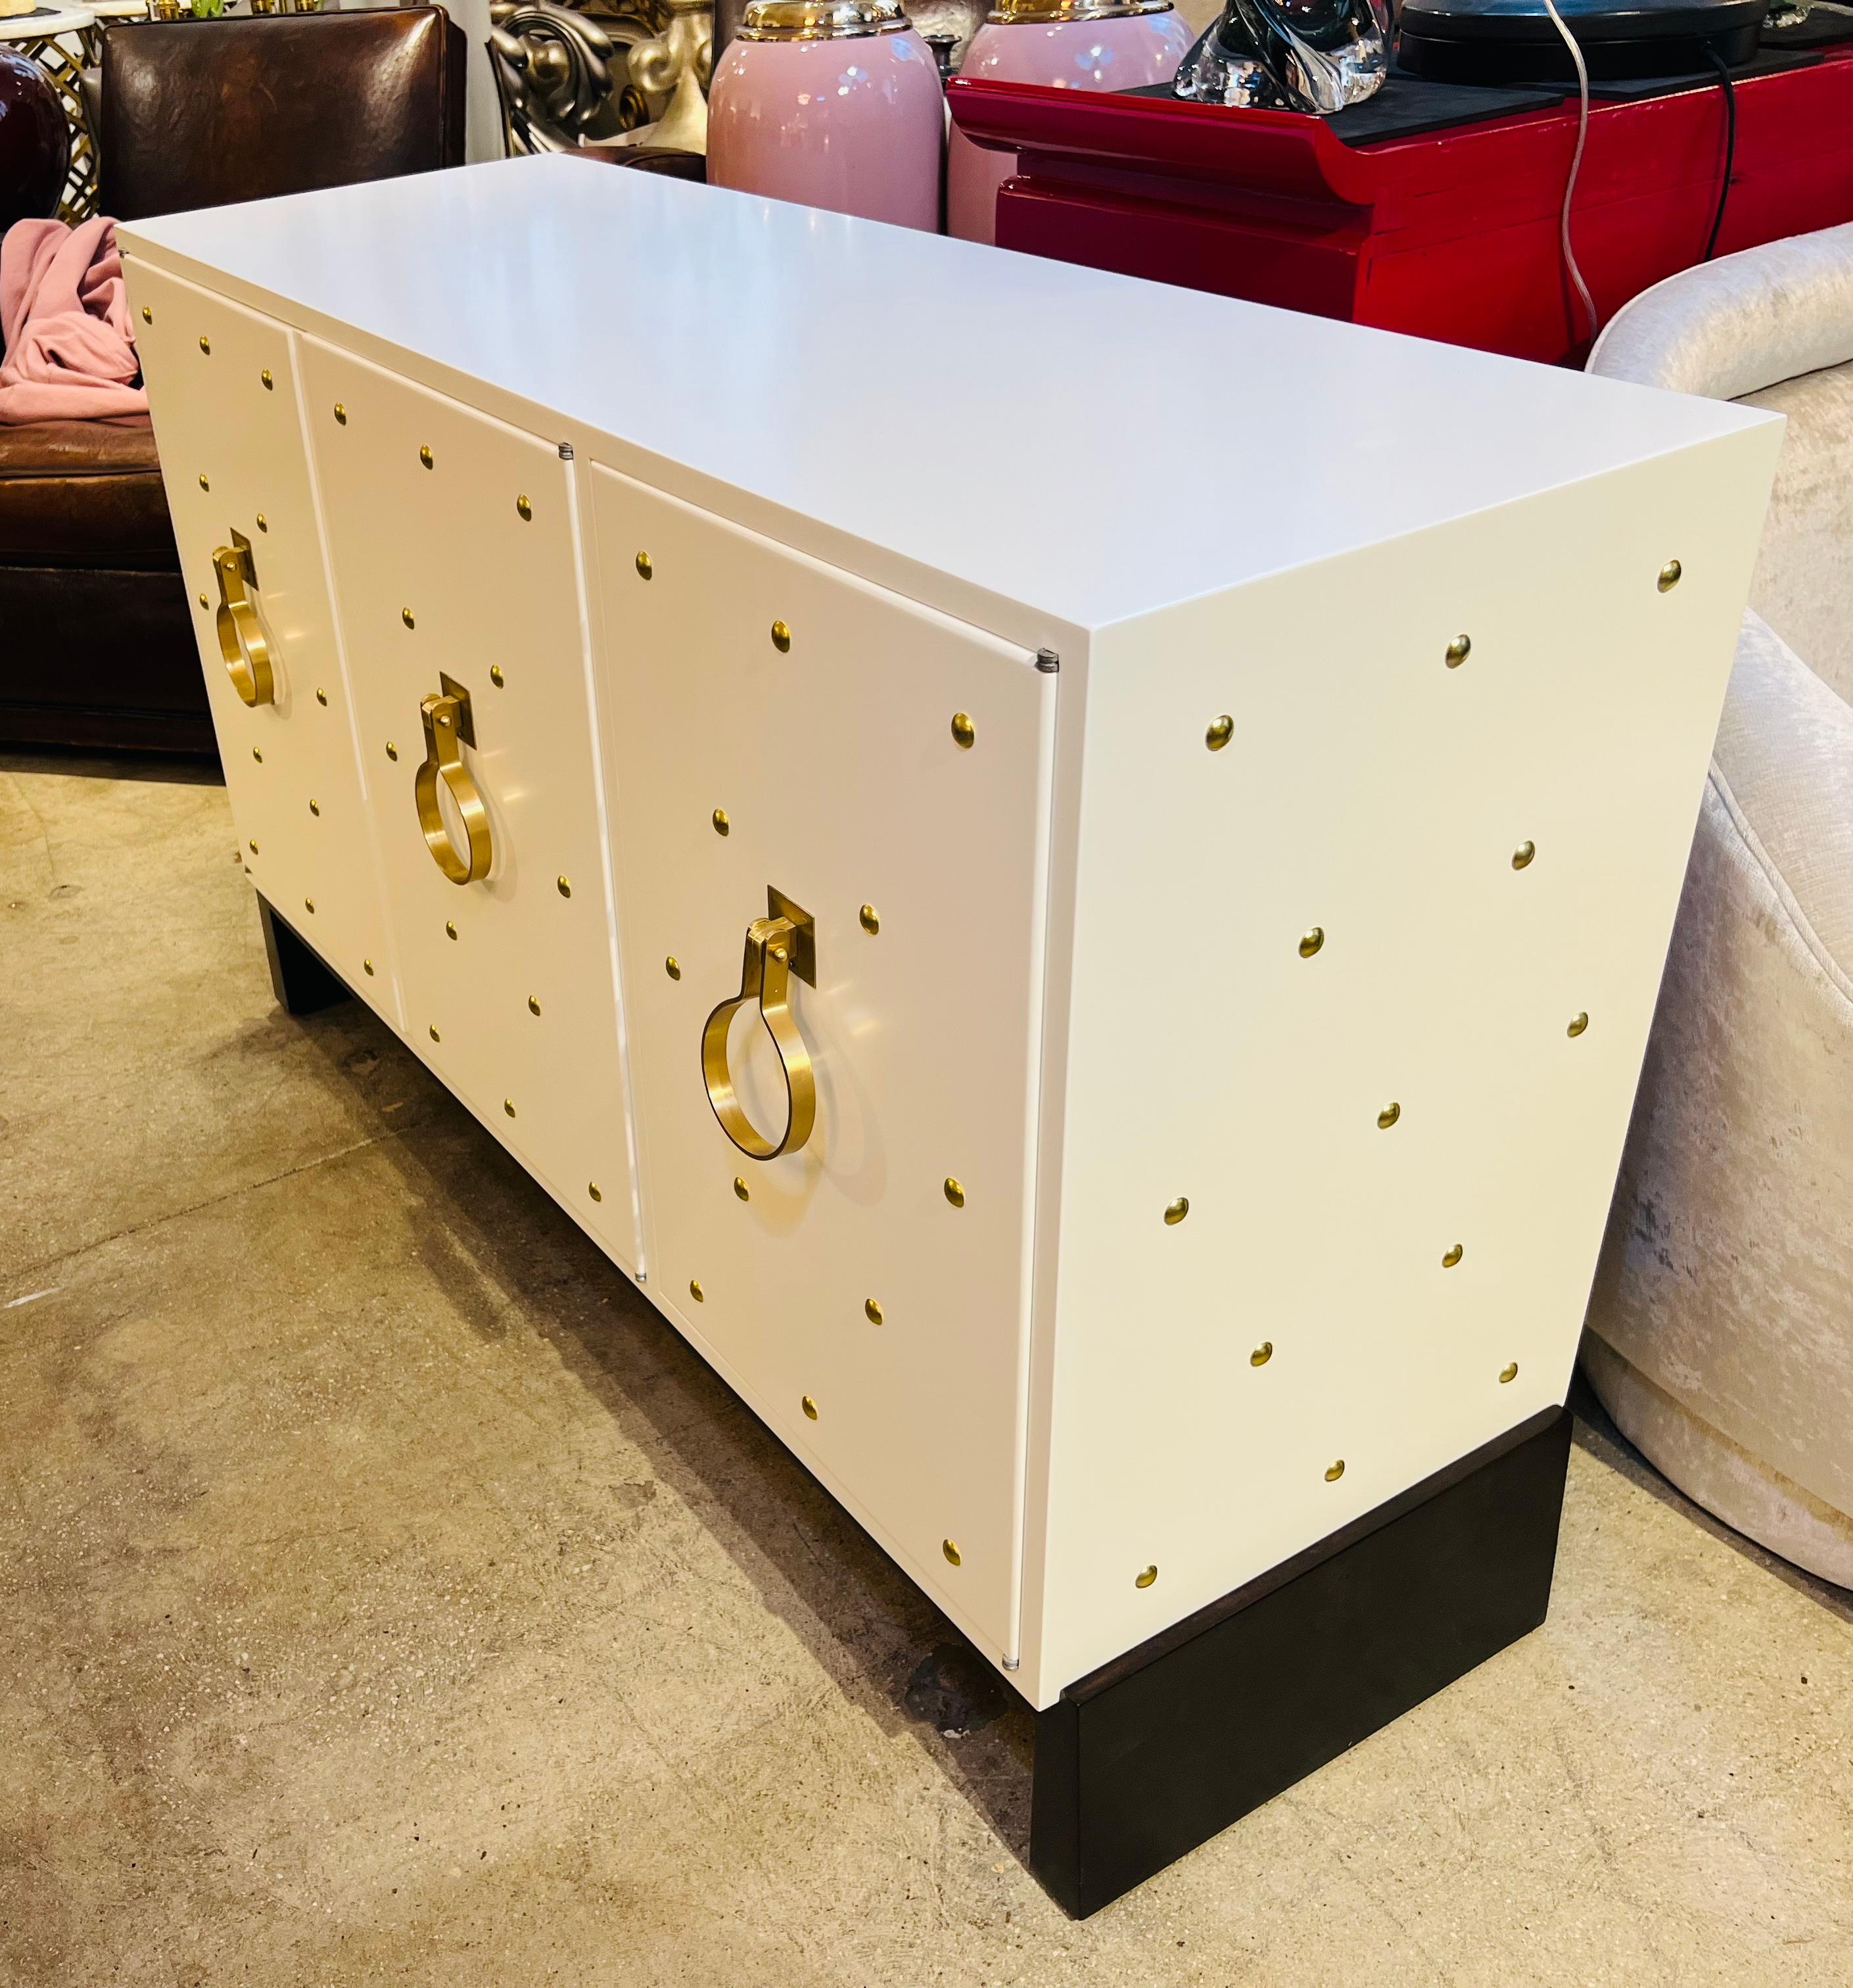 A three door matte white cabinet on a espresso plinth base. The sideboard cabinet has beautiful satin brass pulls and studs to the face and sides. Drawers and shelves are held inside. Excellent beautiful condition. Signed with the makers mark.